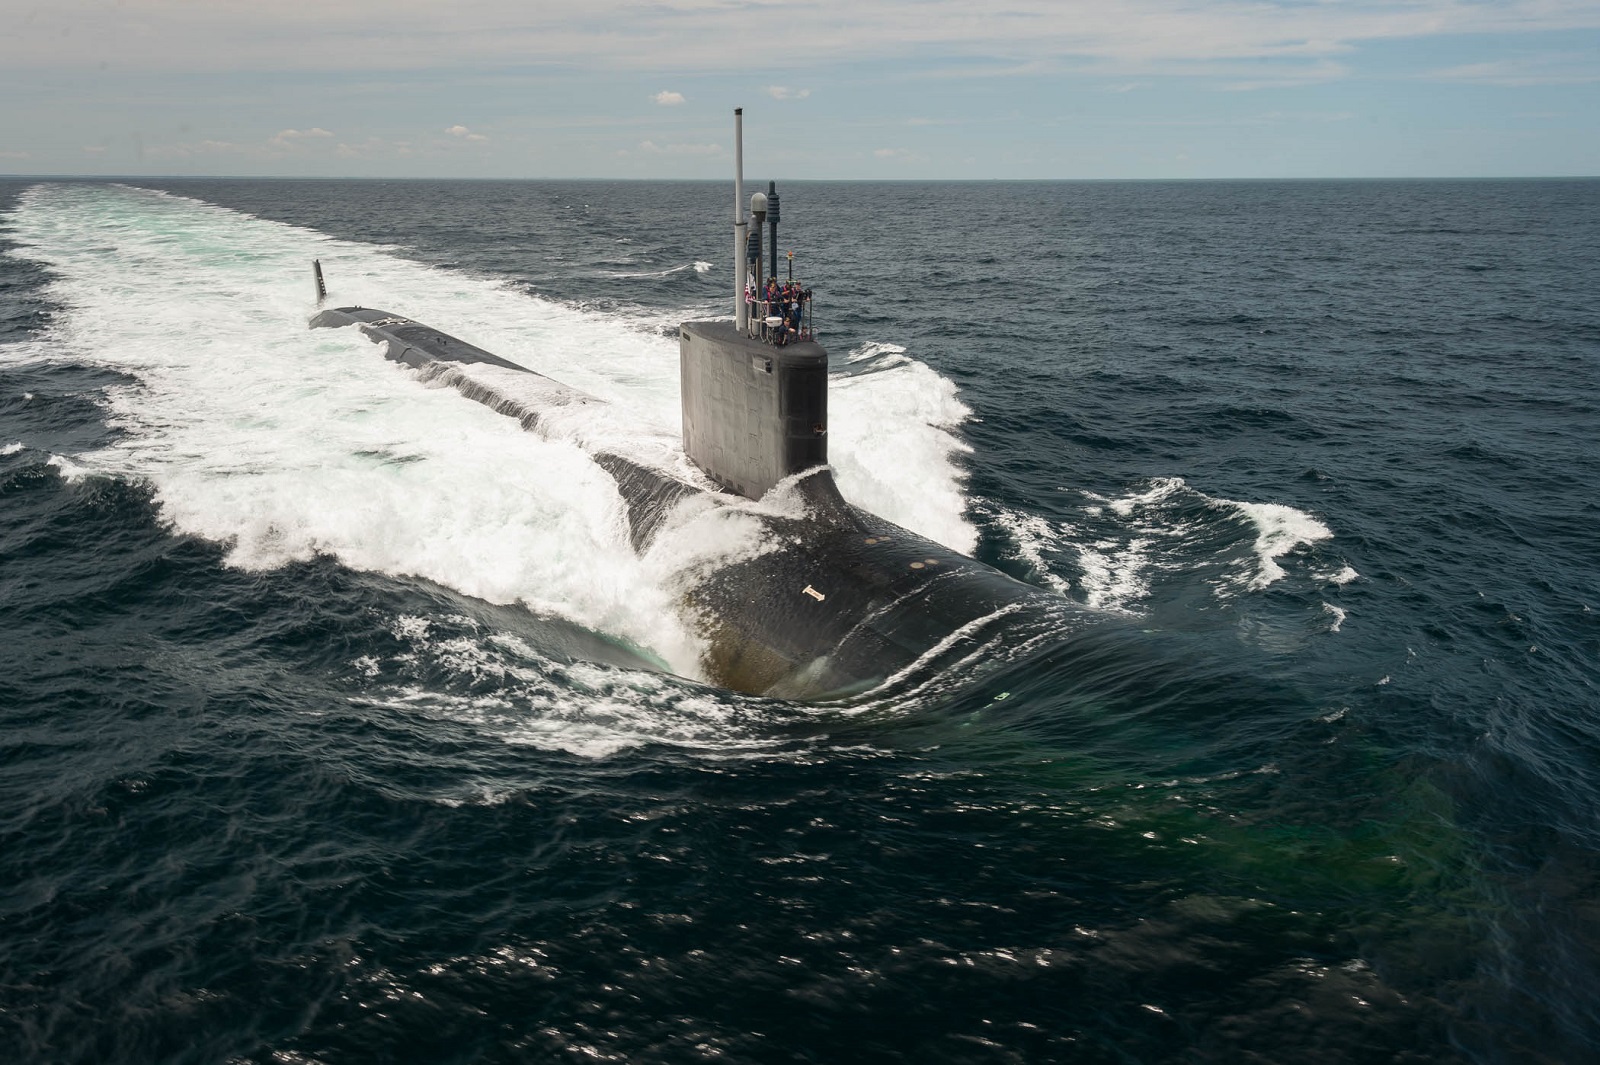 ATLANTIC OCEAN (June 9, 2015) The Virginia-class attack submarine Pre-Commissioning Unit (PCU) John Warner (SSN 785) conducts sea trials in the Atlantic Ocean. U.S. Navy photo courtesy of Huntington Ingalls Industries by Chris Oxley.